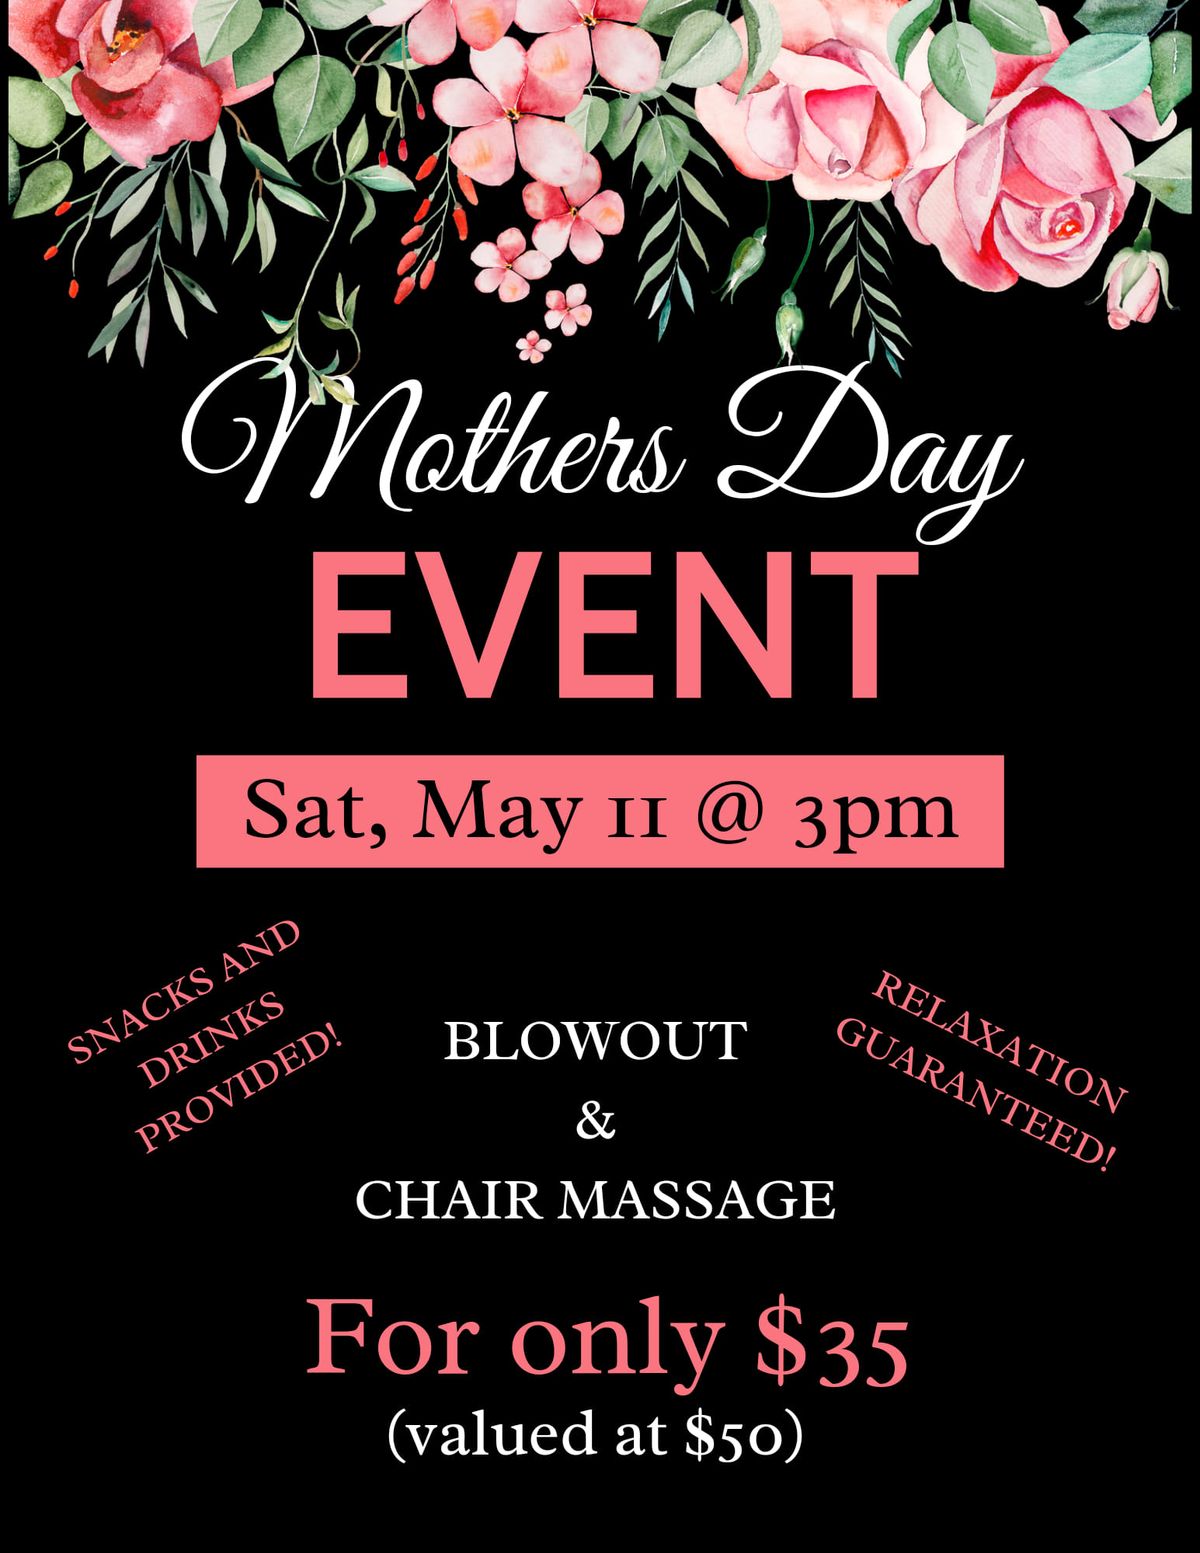 Mother's day event at The Black Sheep!